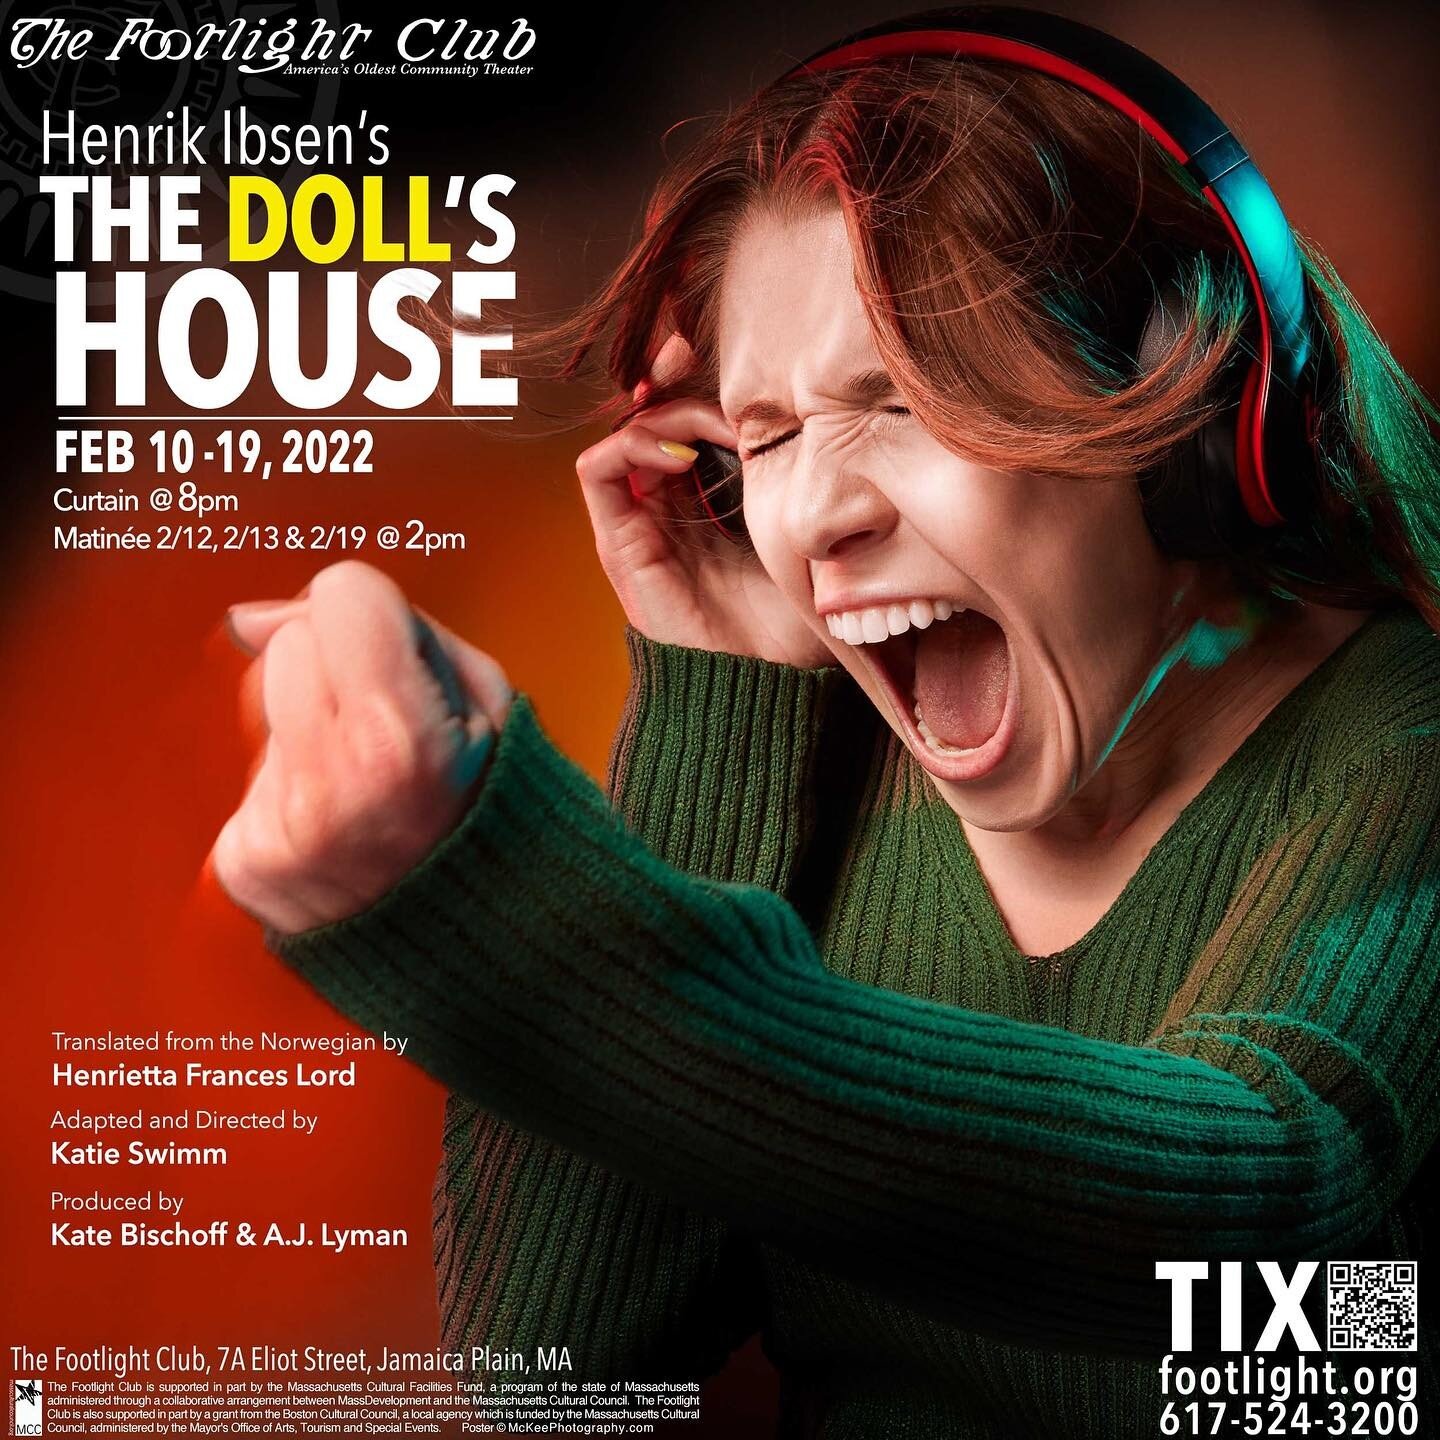 Don&rsquo;t miss our next production (LIVE, IN-PERSON) of The Doll&rsquo;s House by Henrik Ibsen!  Eliot Hall is now  fully accessible.  Get your tickets today at  https://www.footlight.org/shop-box-office Feb 10-19 at 8pm with matinees on 2/12, 2/13